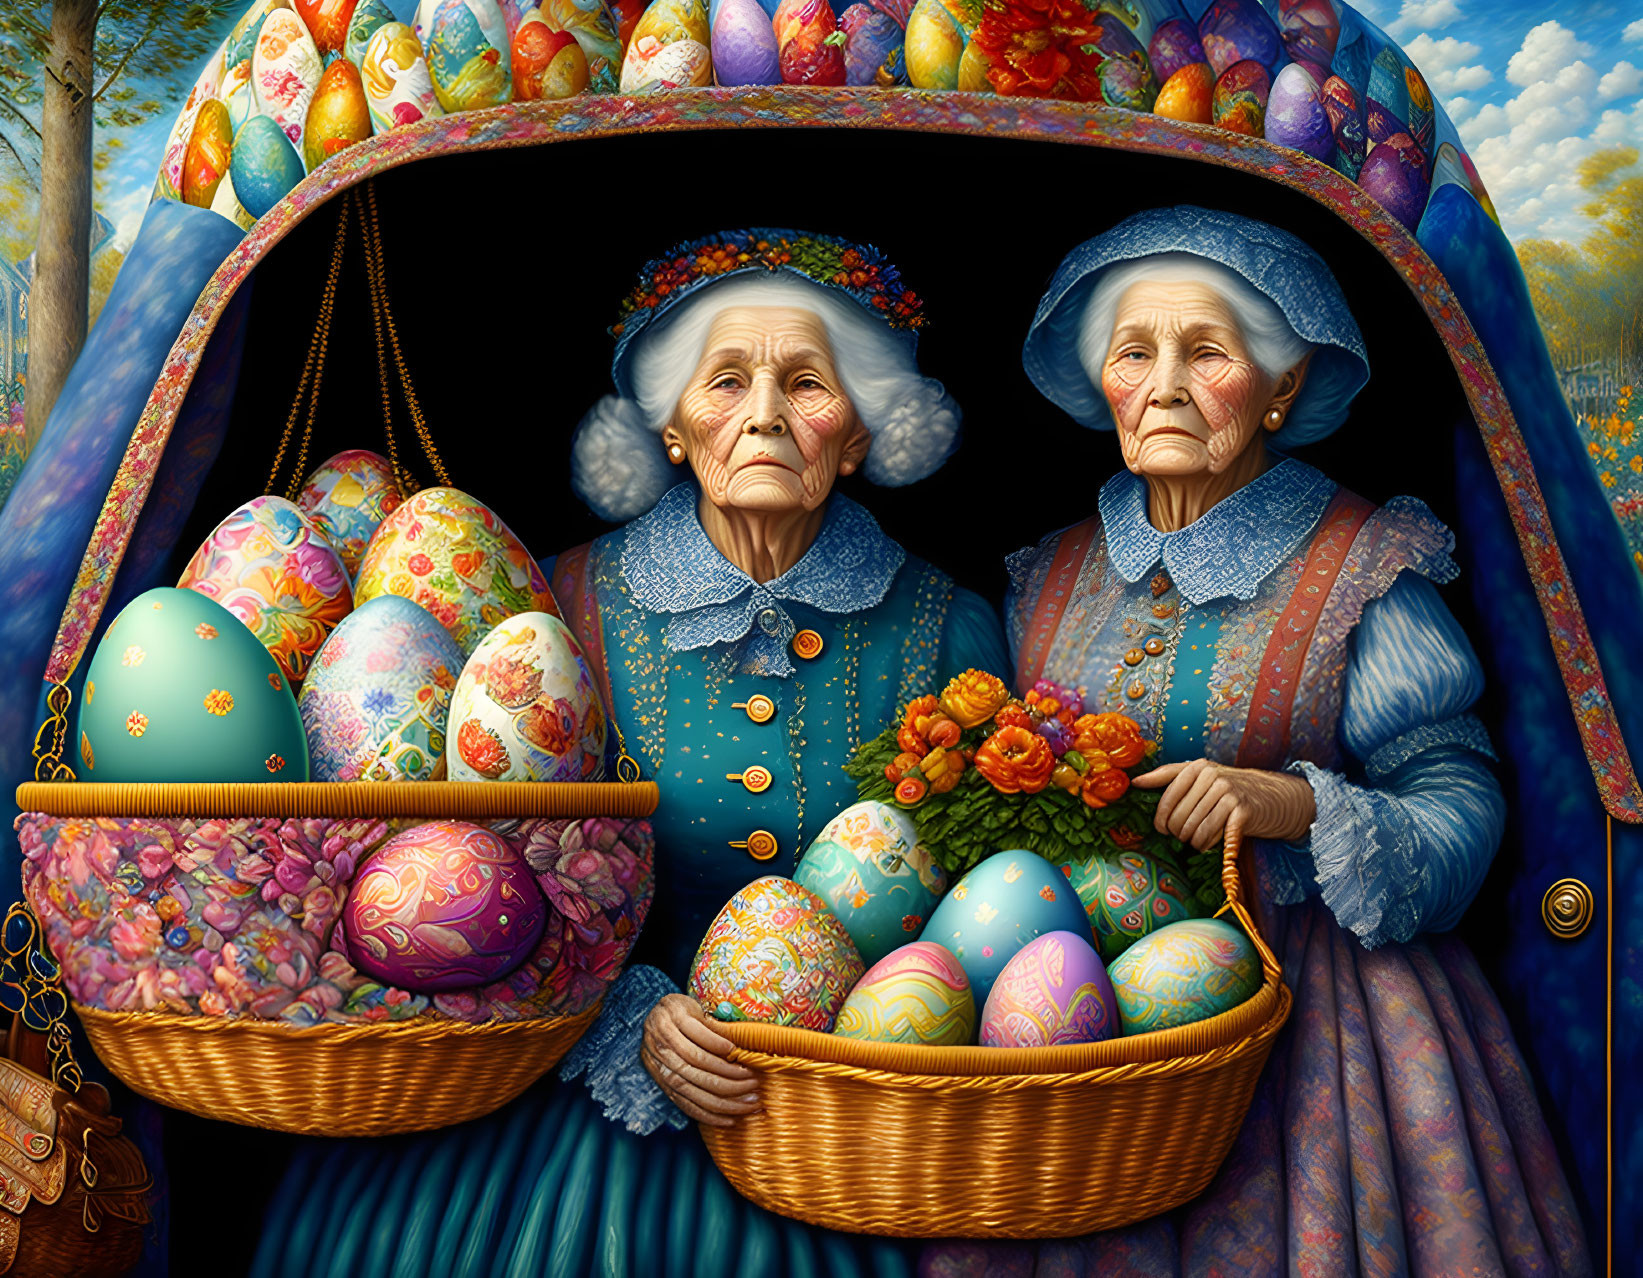 Old women with bags, food baskets and easter eggs 